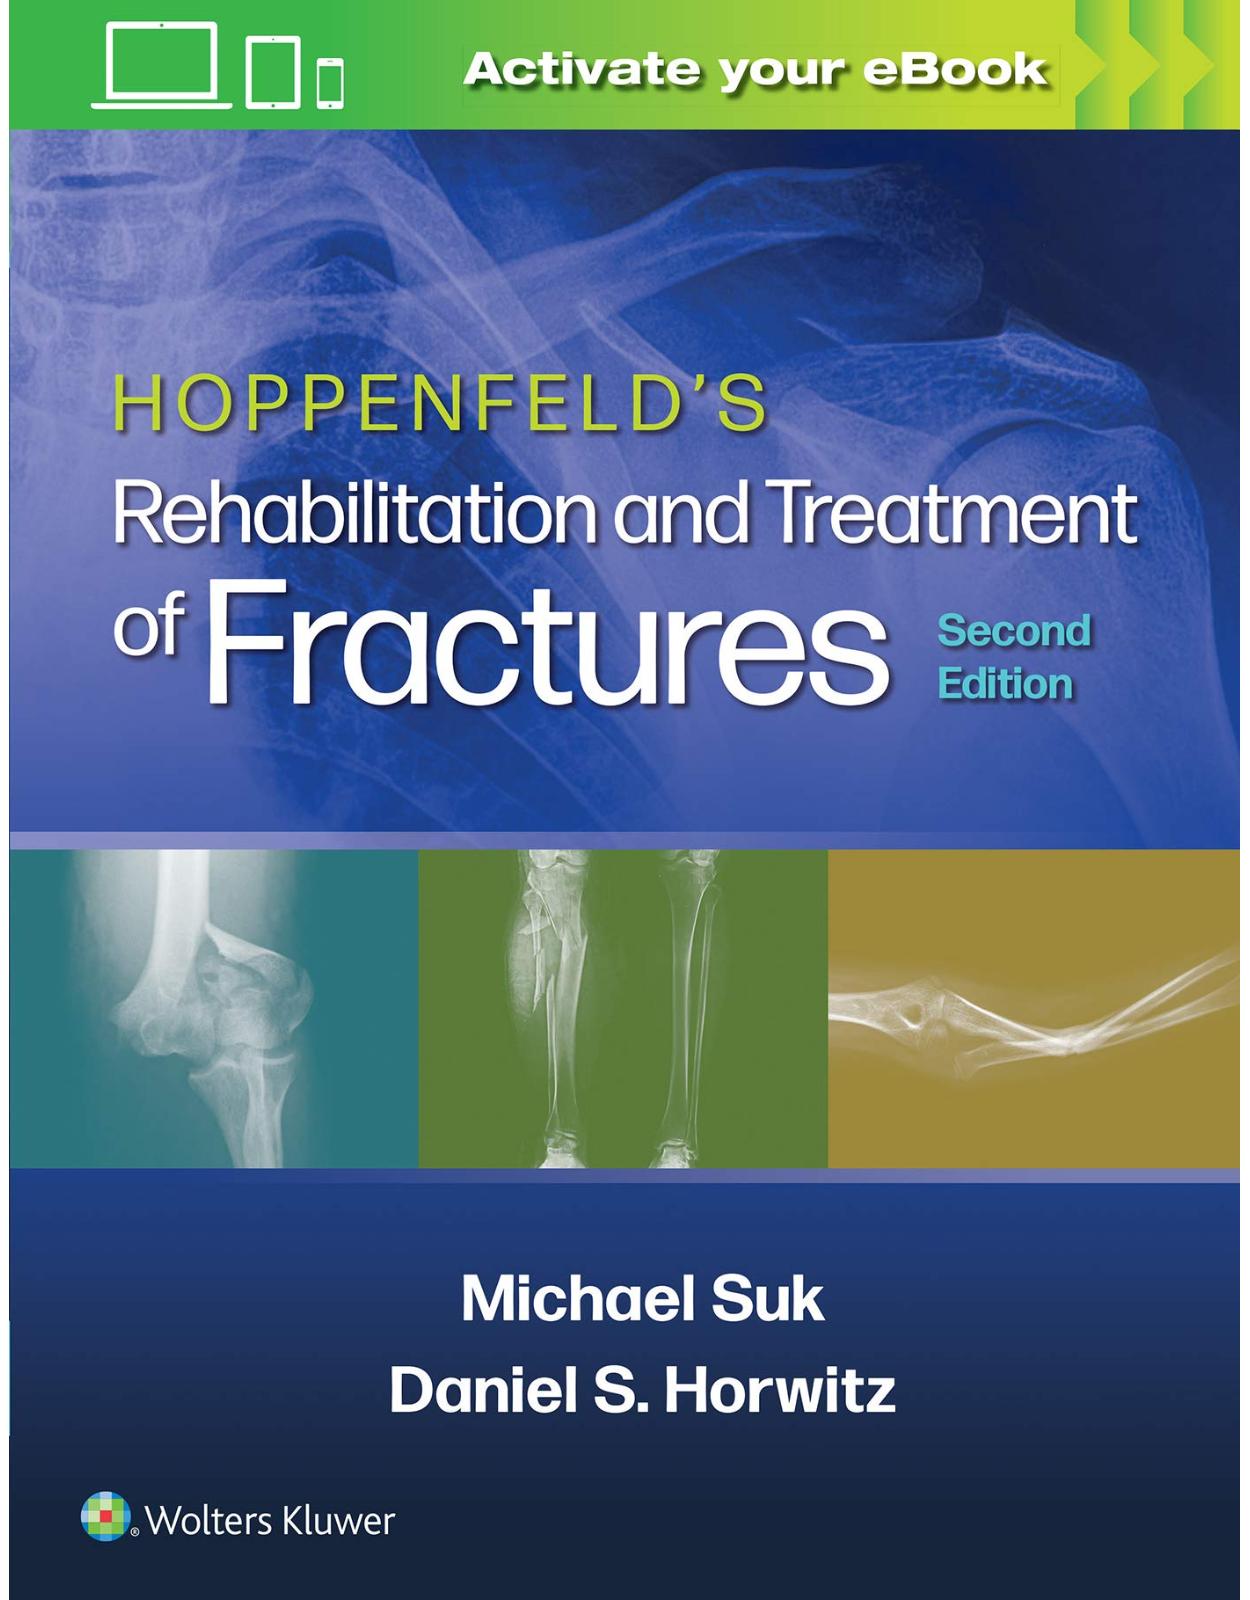 Hoppenfeld’s Treatment and Rehabilitation of Fractures